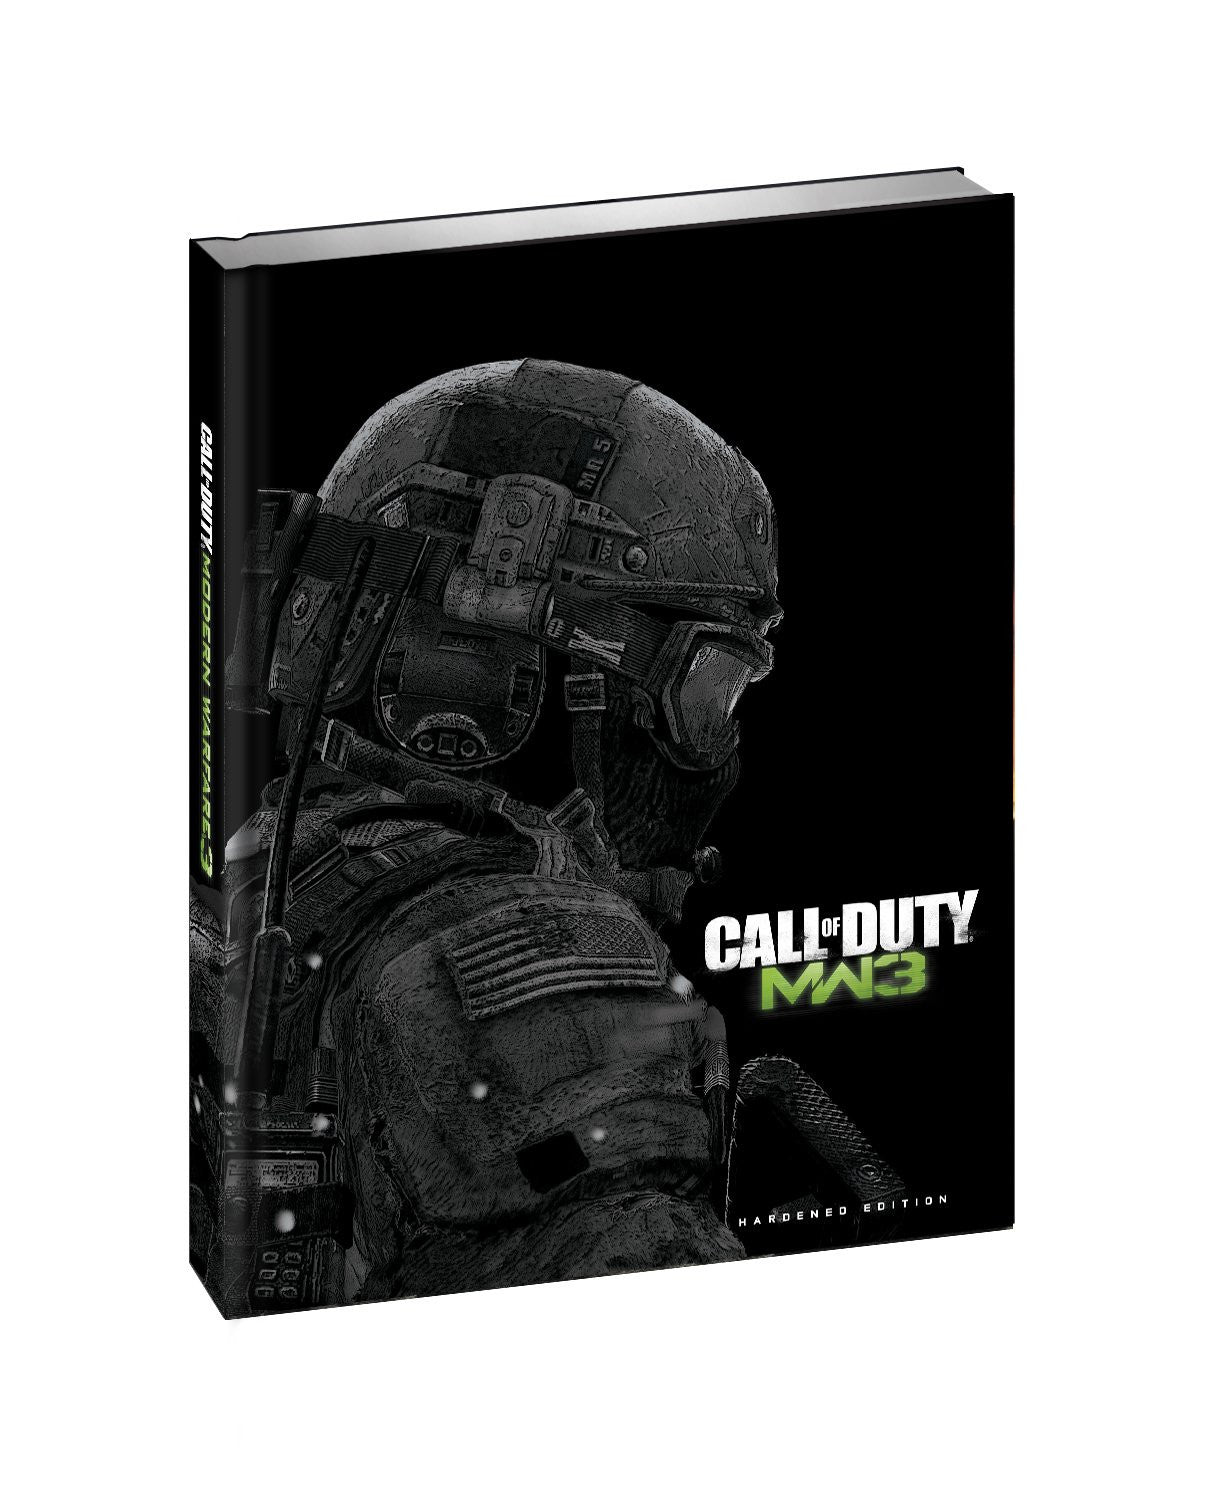 Call of Duty: Modern Warfare 3 Limited Edition (Hardcover)